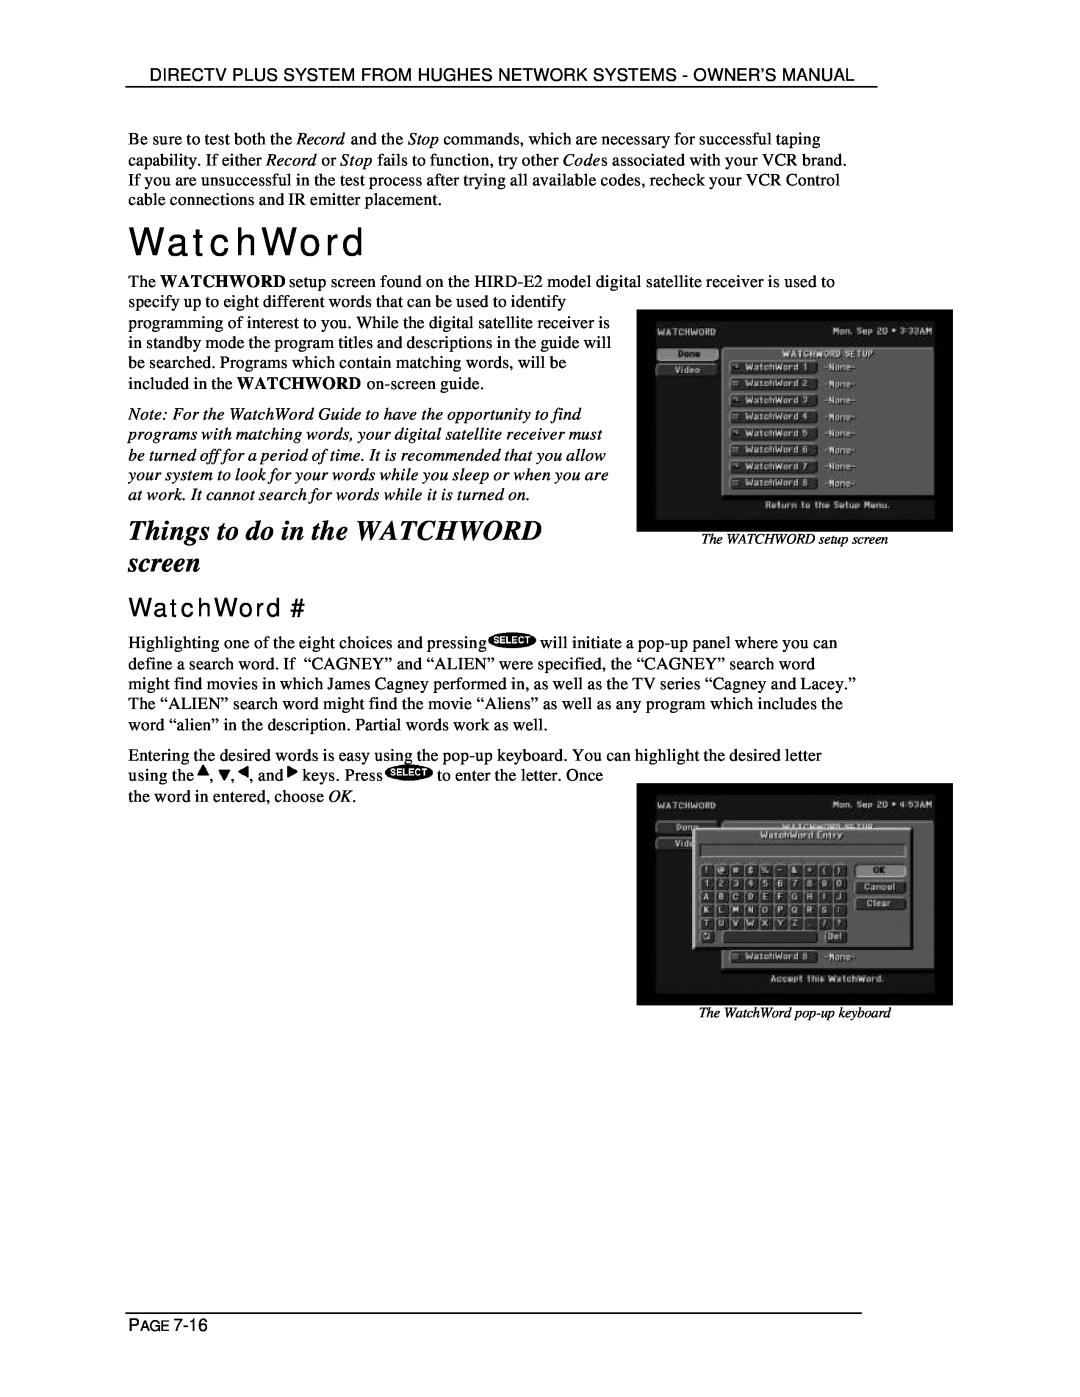 DirecTV HIRD-E25, HIRD-E11 owner manual Things to do in the WATCHWORD, screen, WatchWord # 